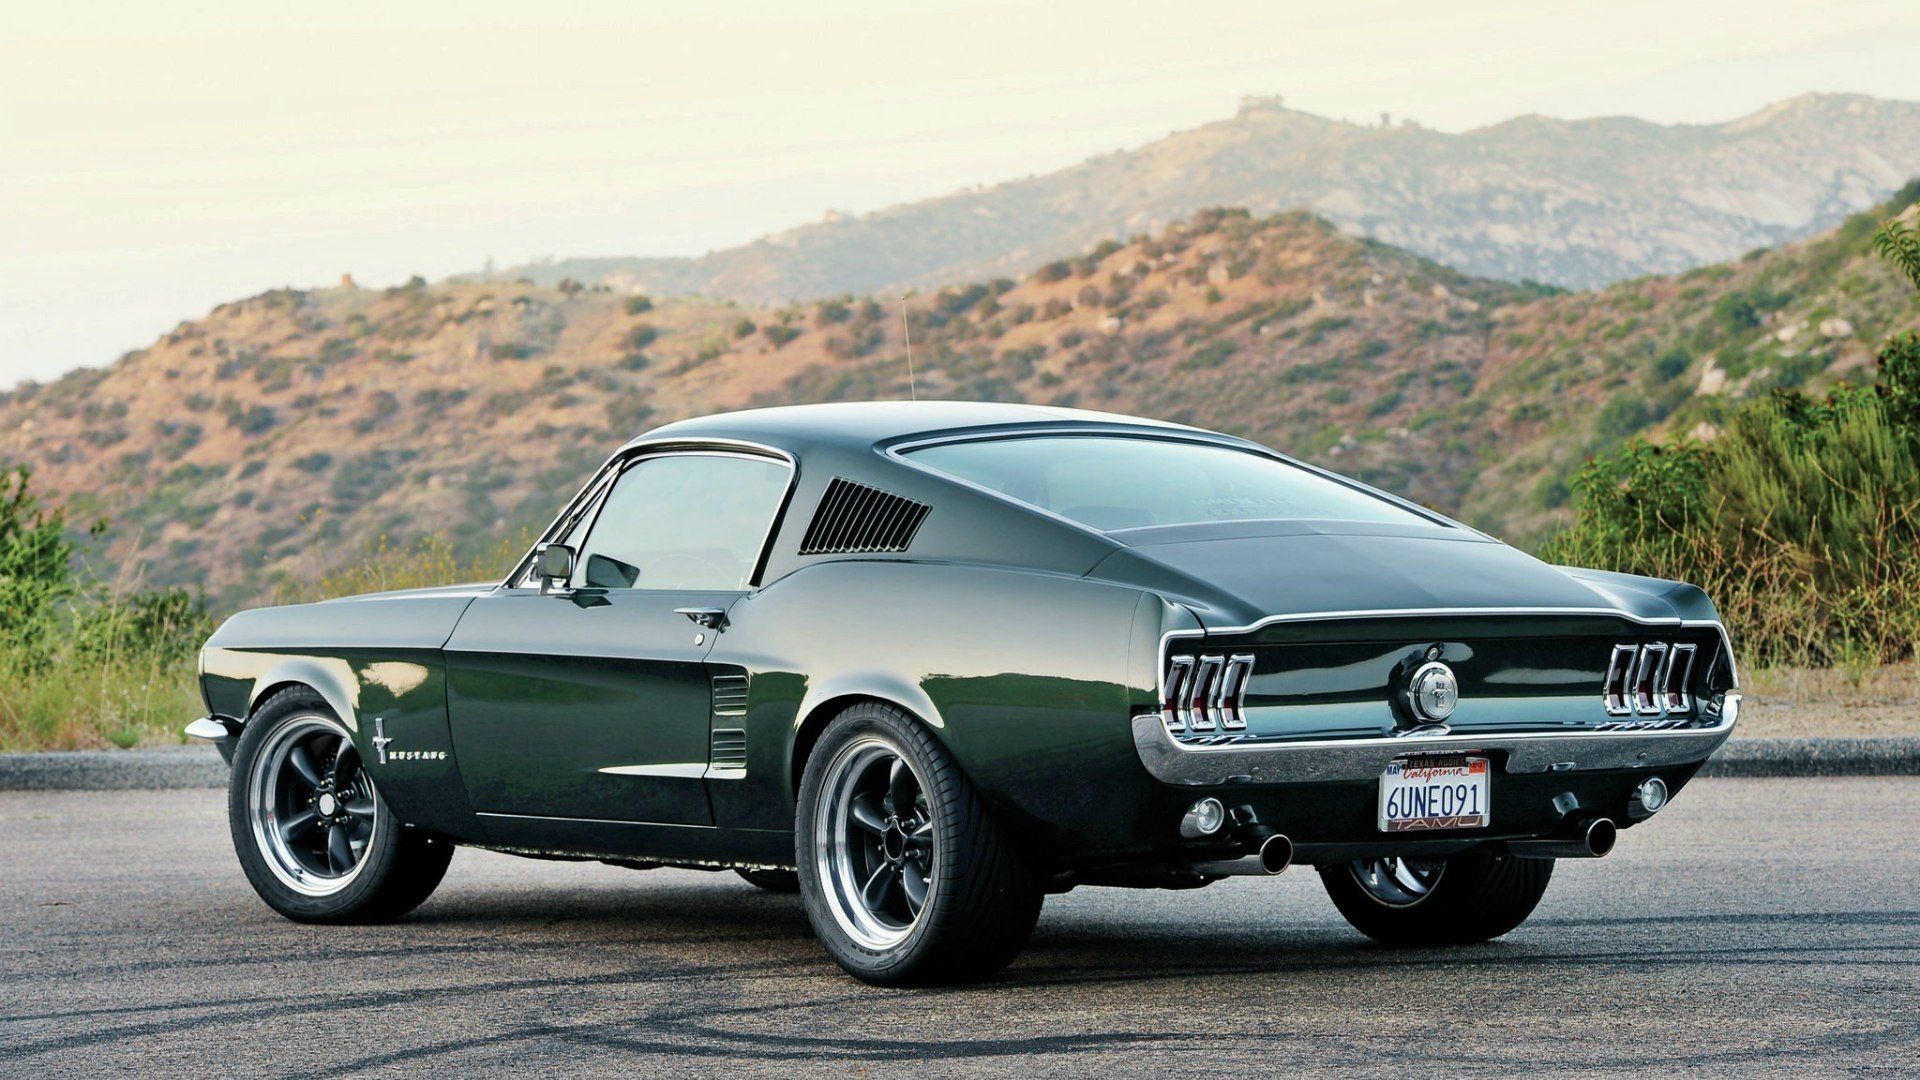 Ford Mustang Vintage HD Wallpapers - Wallpaper Cave